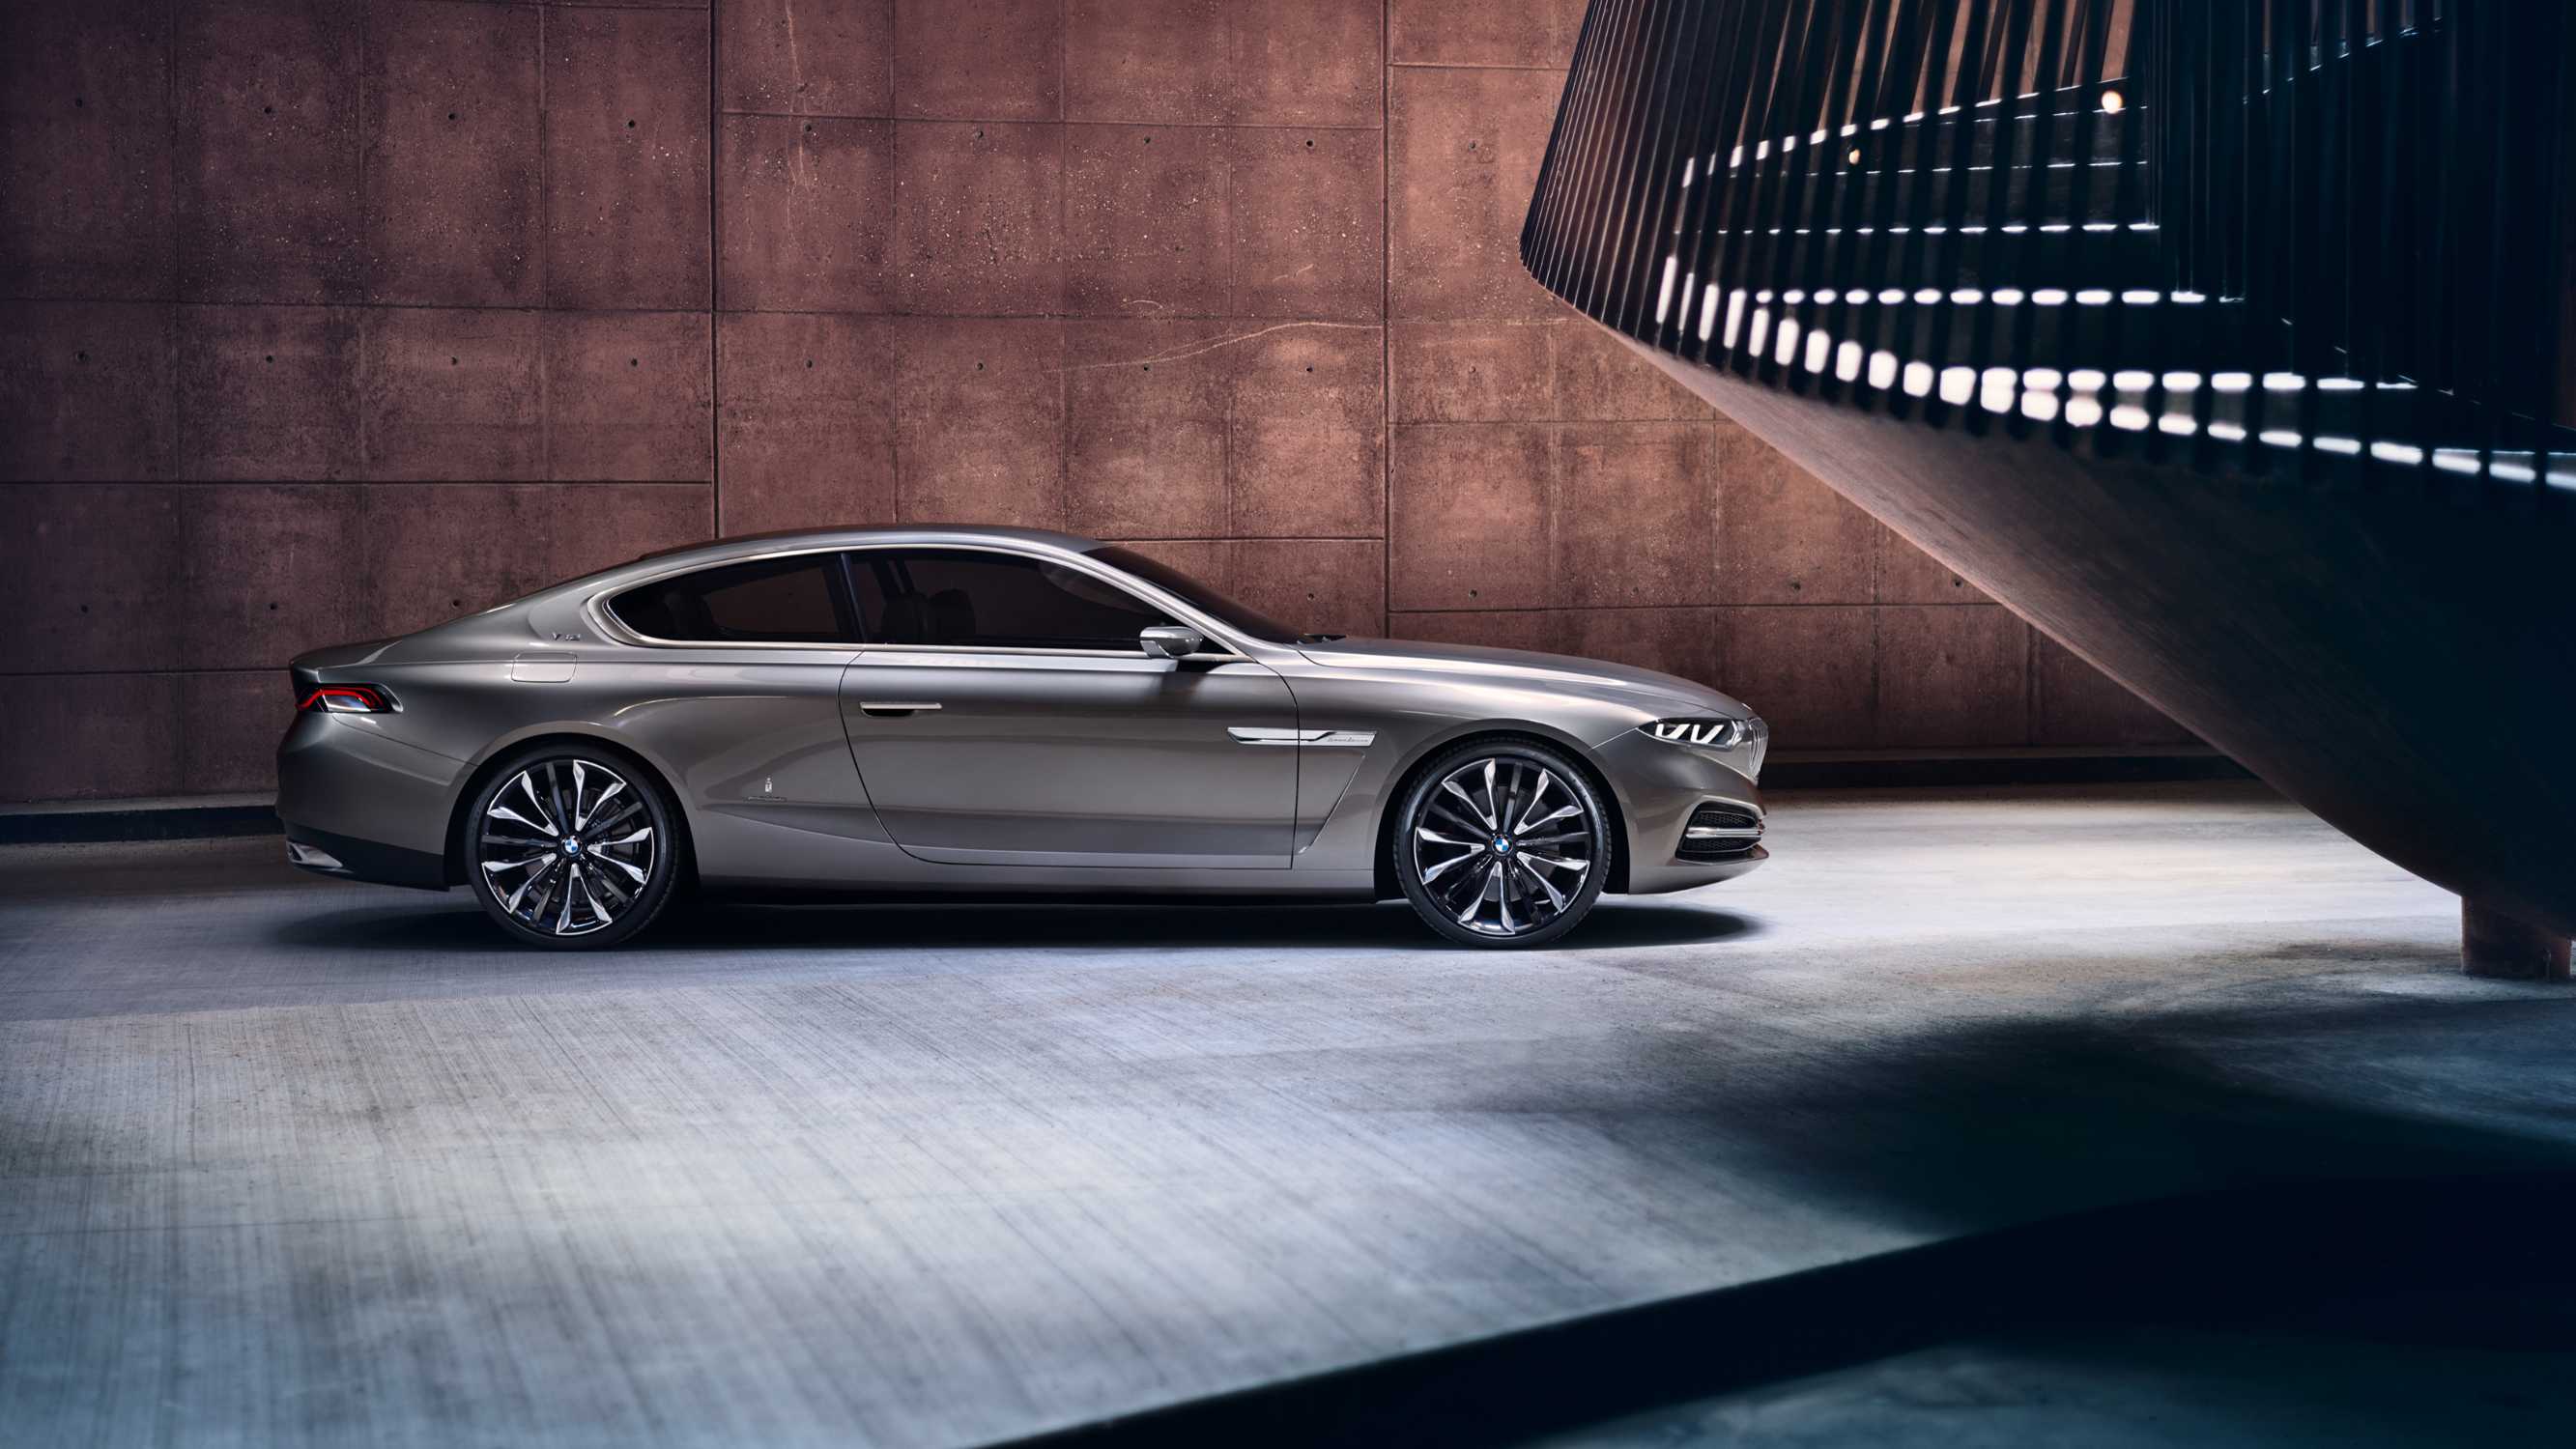 Nice wallpapers BMW Pininfarina Gran Lusso Coupe 2666x1500px